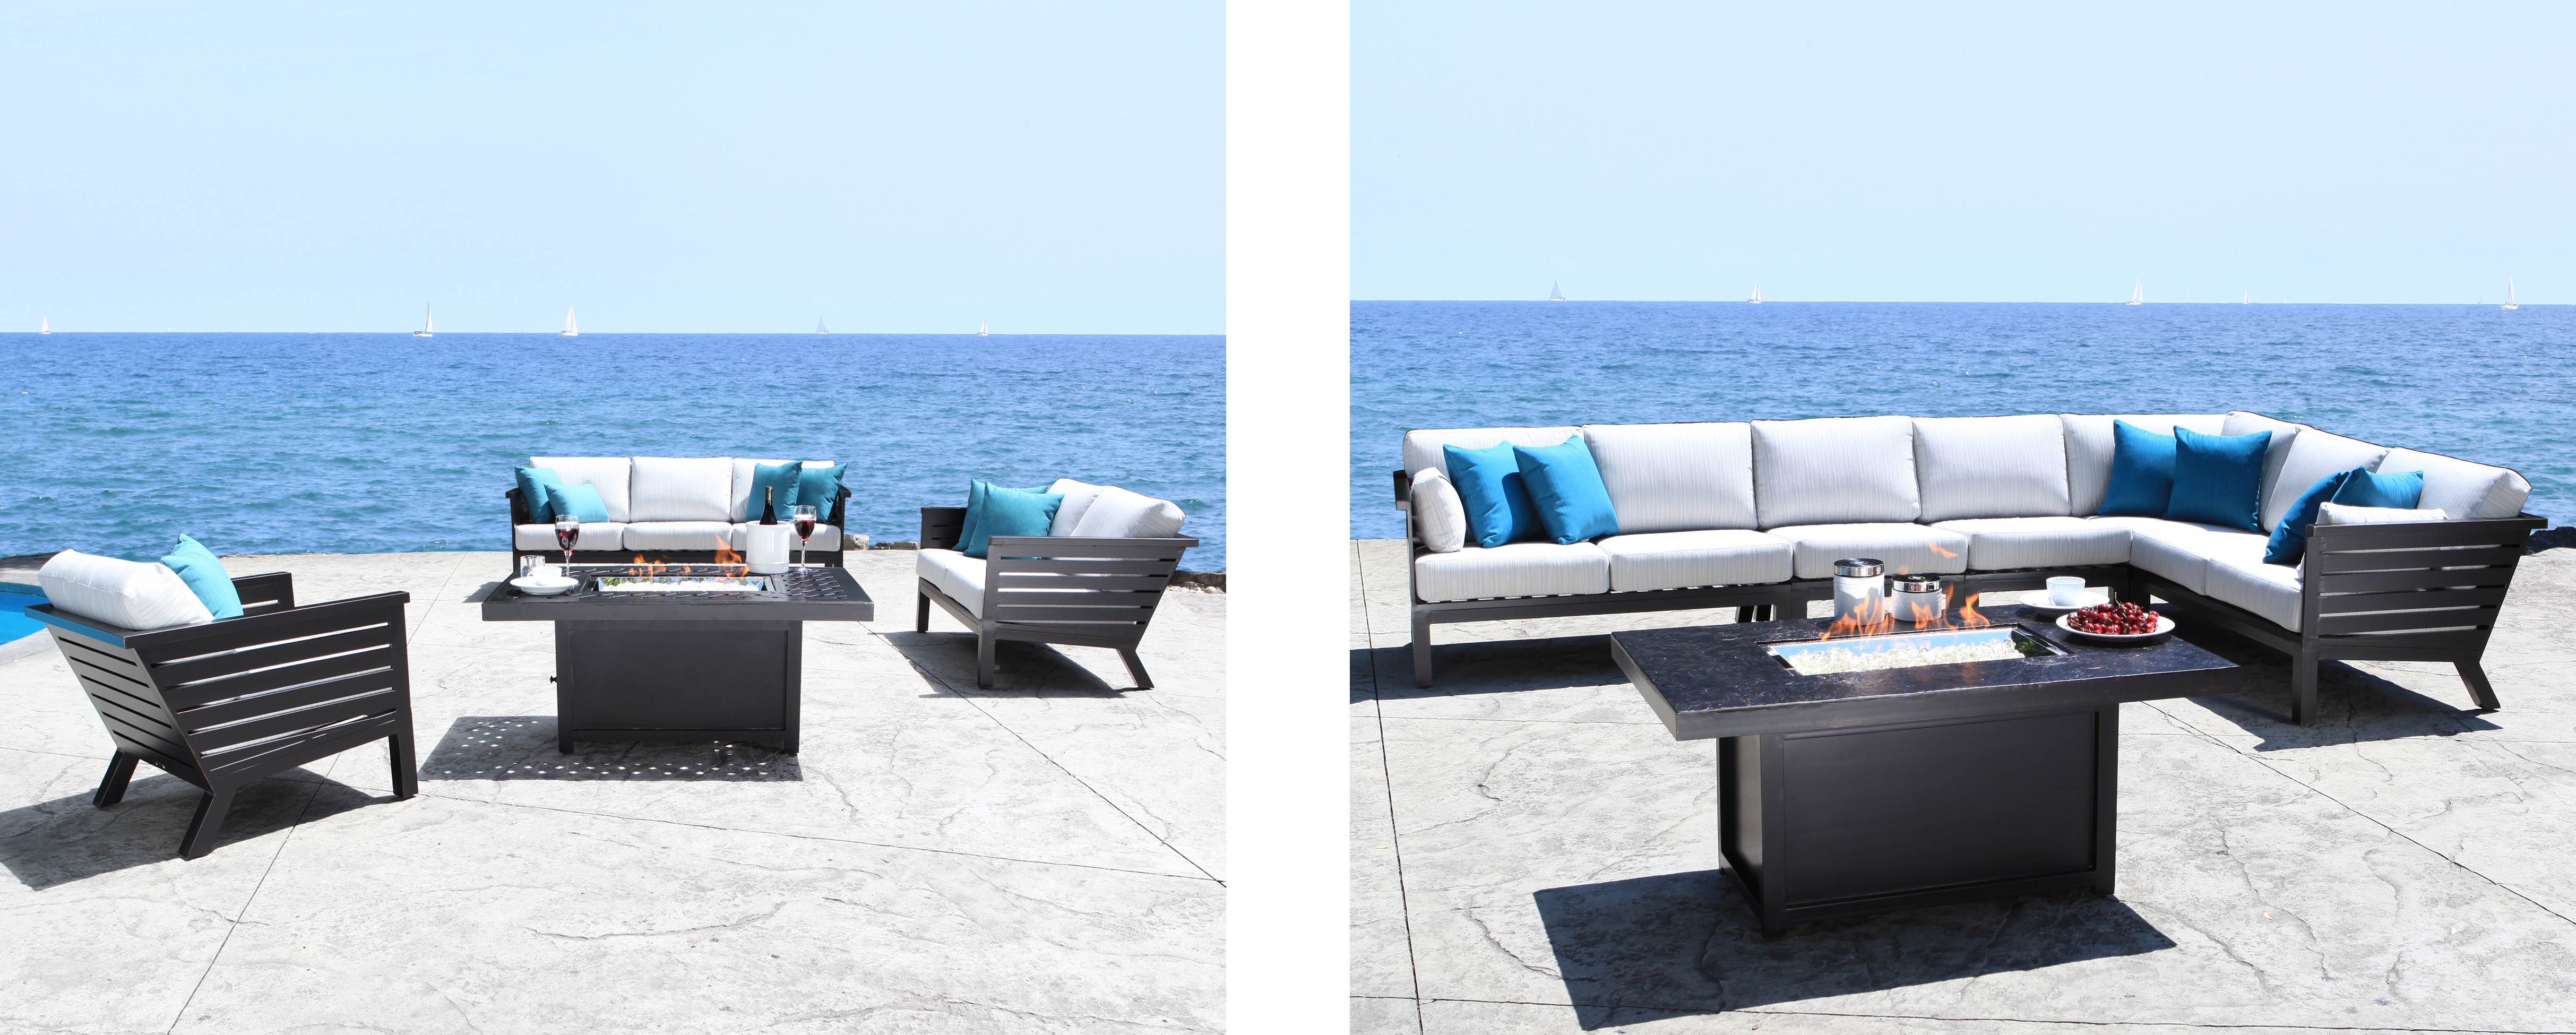 Deep Seating Vs Sectional Patio Furniture in sizing 4853 X 1950